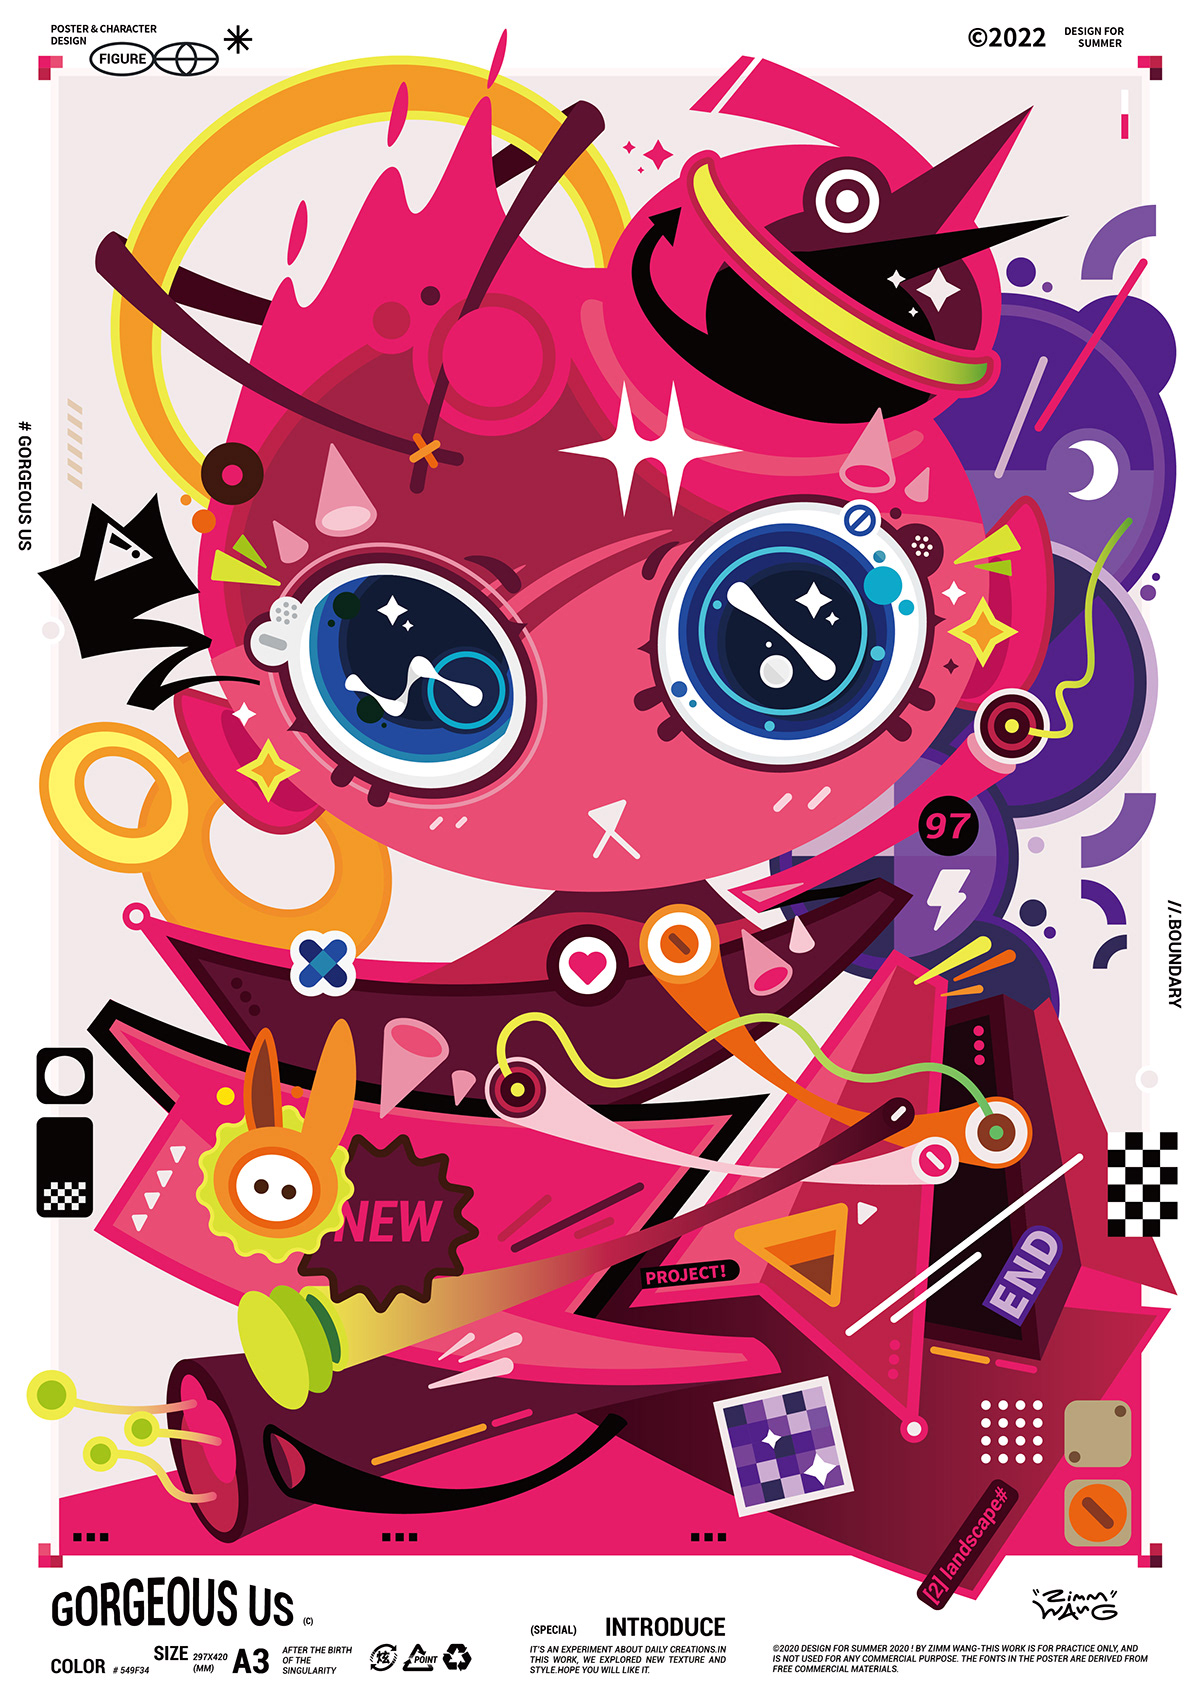 art Character design  colorful poster